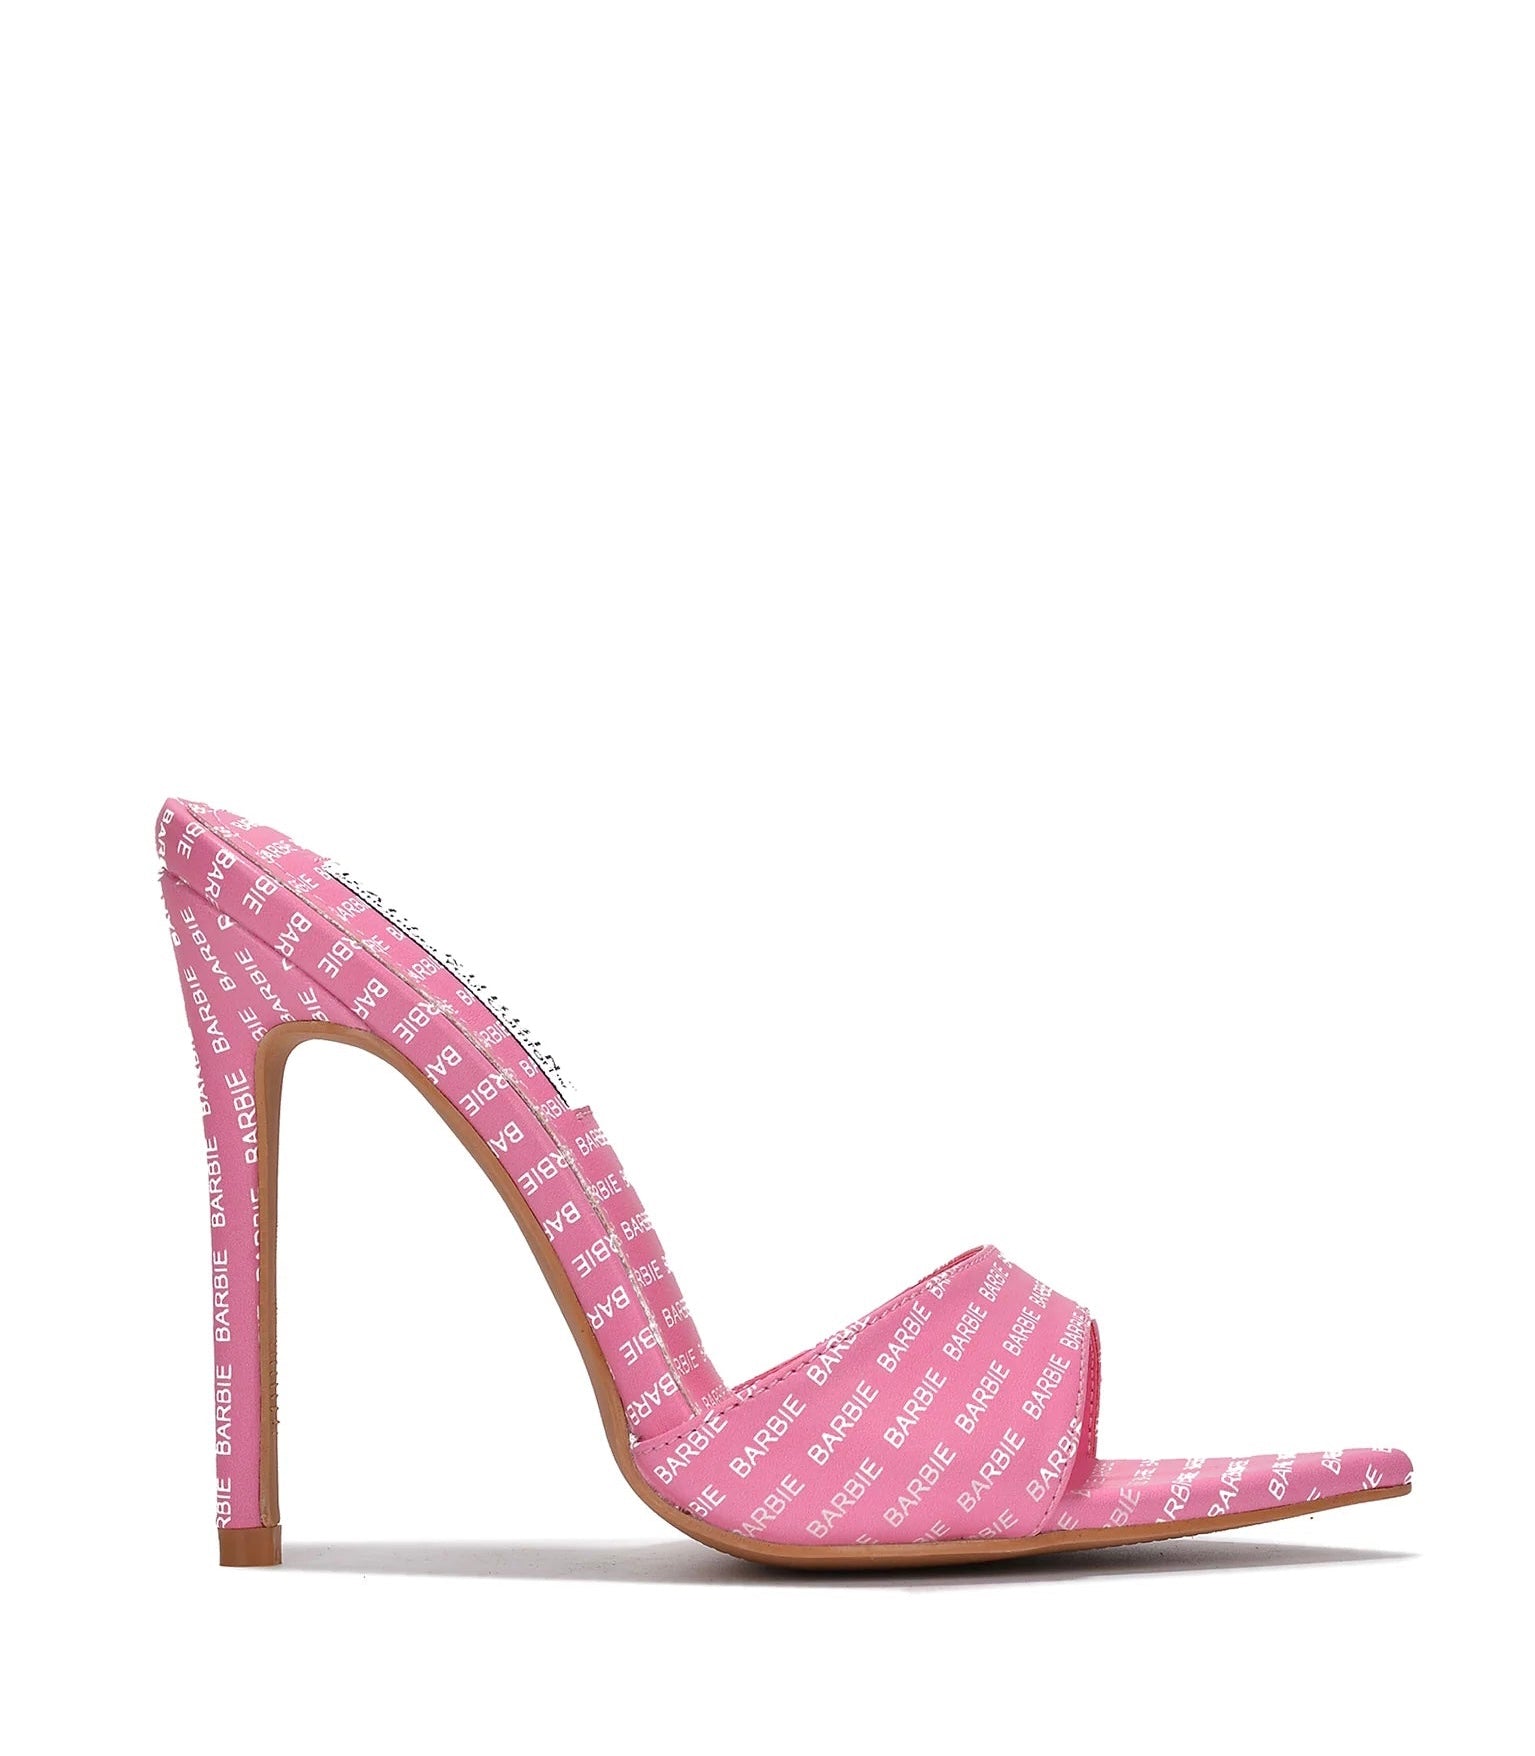 DARLING! Hot Pink Open Toe Heels w/ Bow Accents Genuine BARBIE Shoes